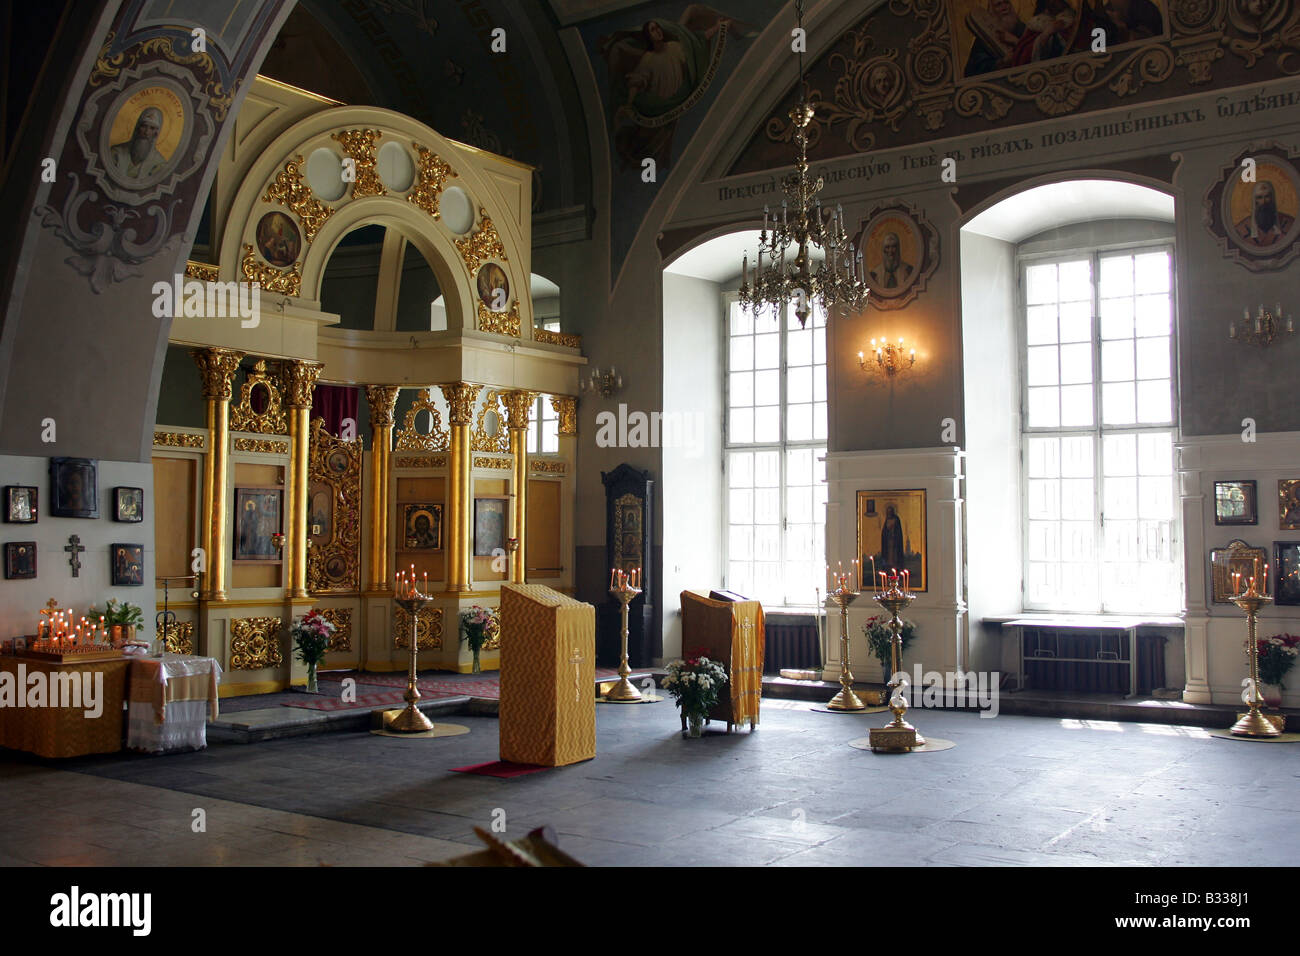 Interior of Orthodox Greek Cathedral showing architectural details. Stock Photo